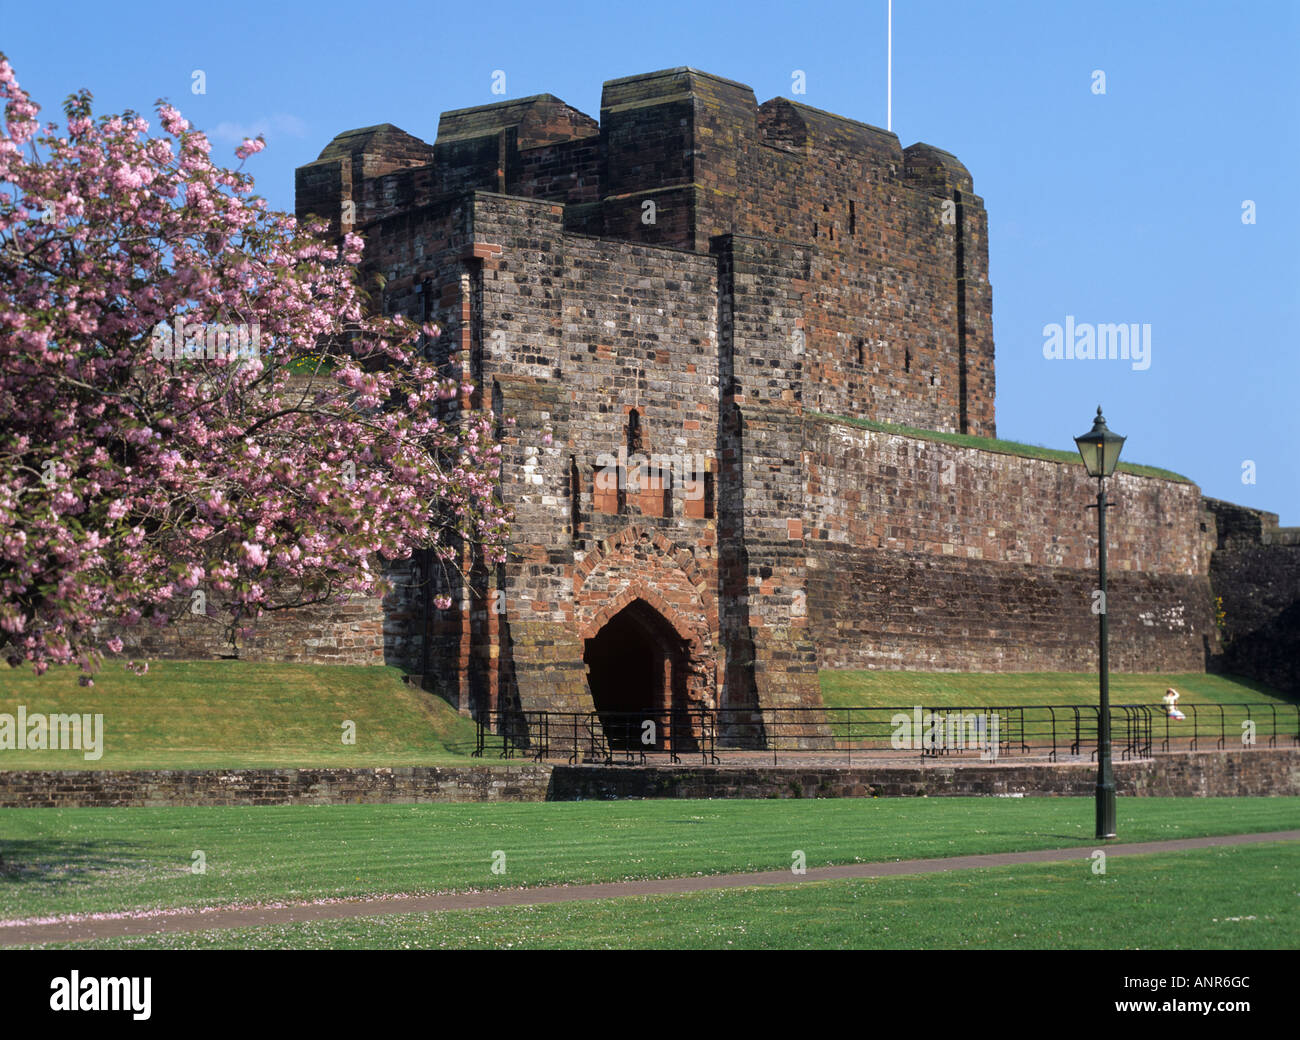 Carlisle Castle in Carlisle, Cumbria, England. Shown in the spring with cherry blossom Stock Photo